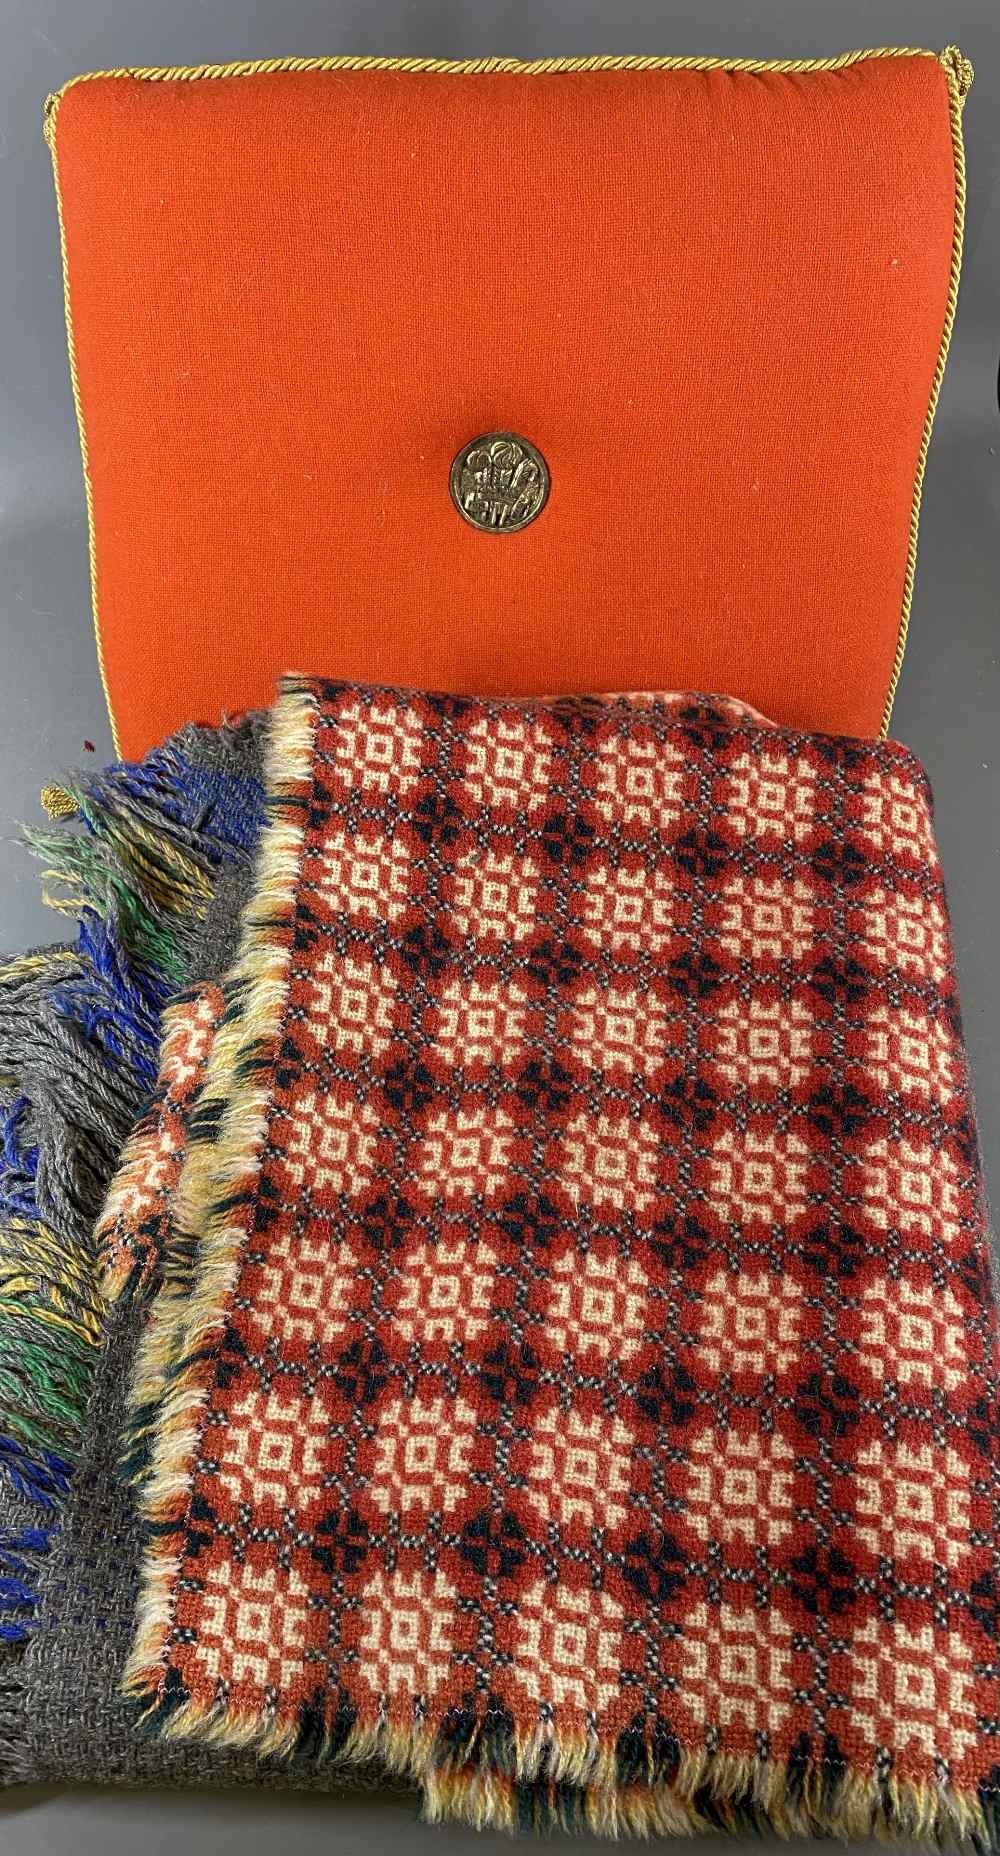 HRH PRINCE CHARLES INVESTITURE CUSHION and two, possibly Welsh, woolwork throws